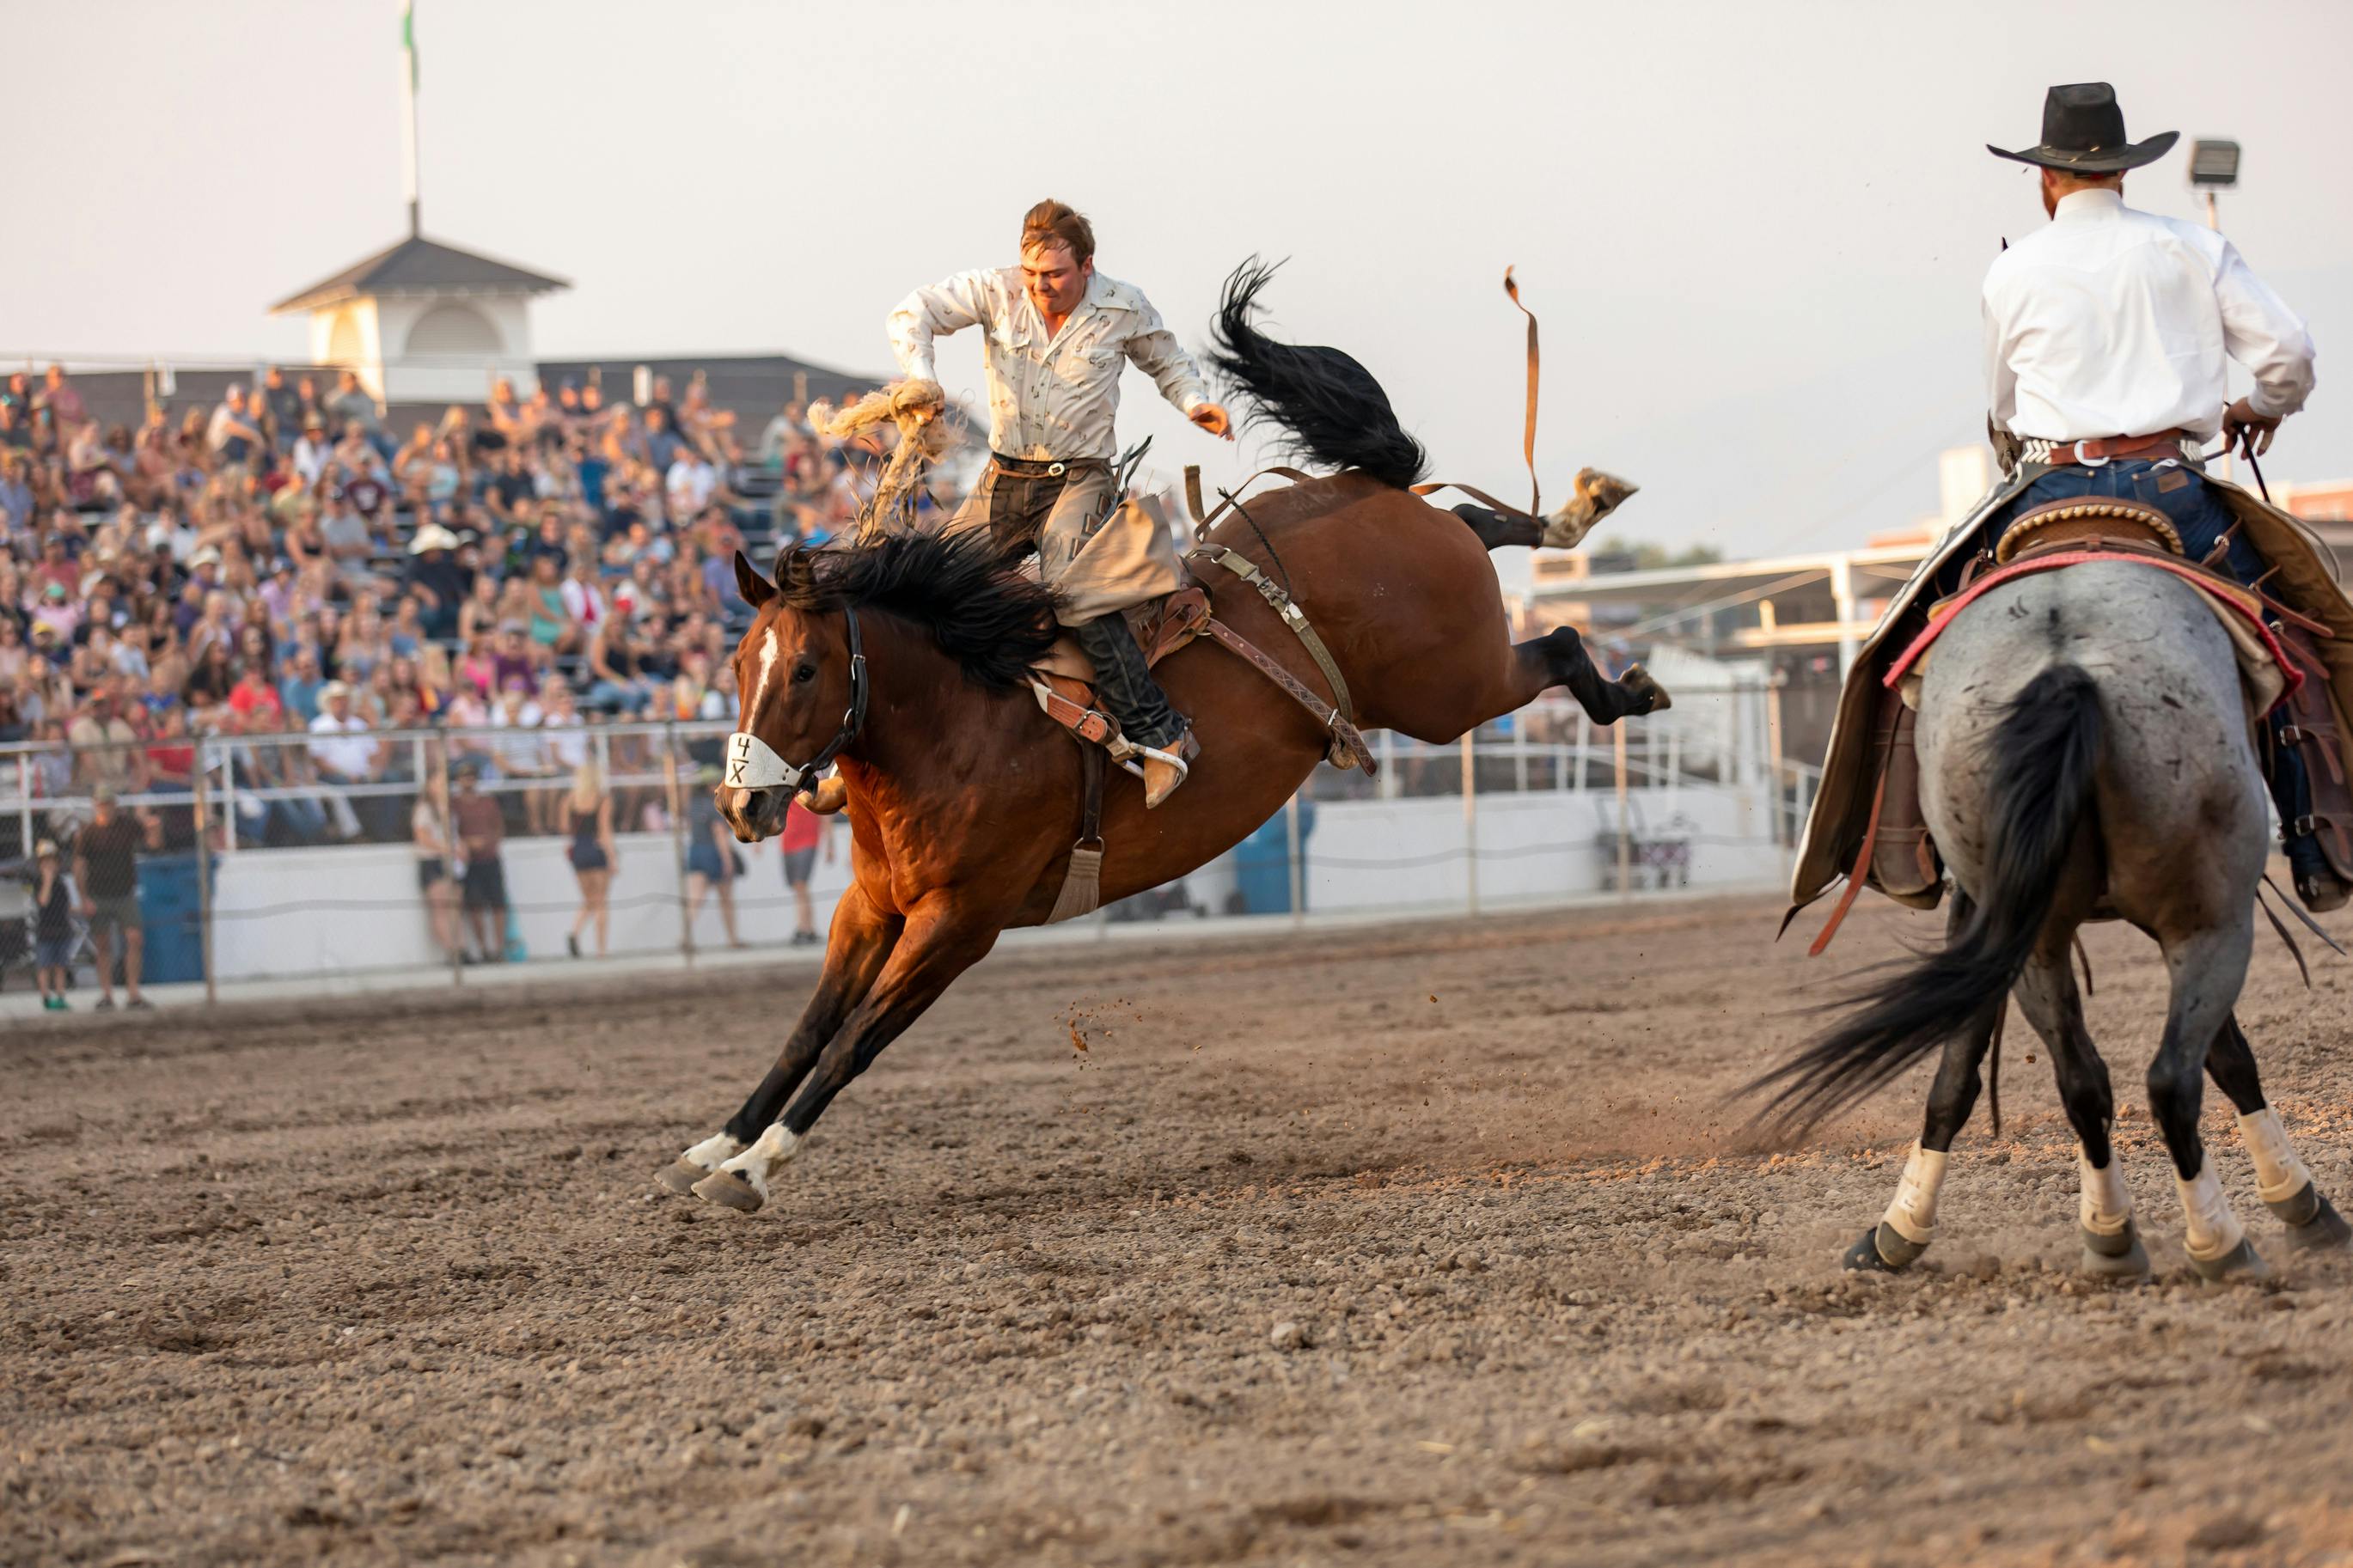 A bronc rider at a rodeo in the evening. A full grandstands watches behind him.